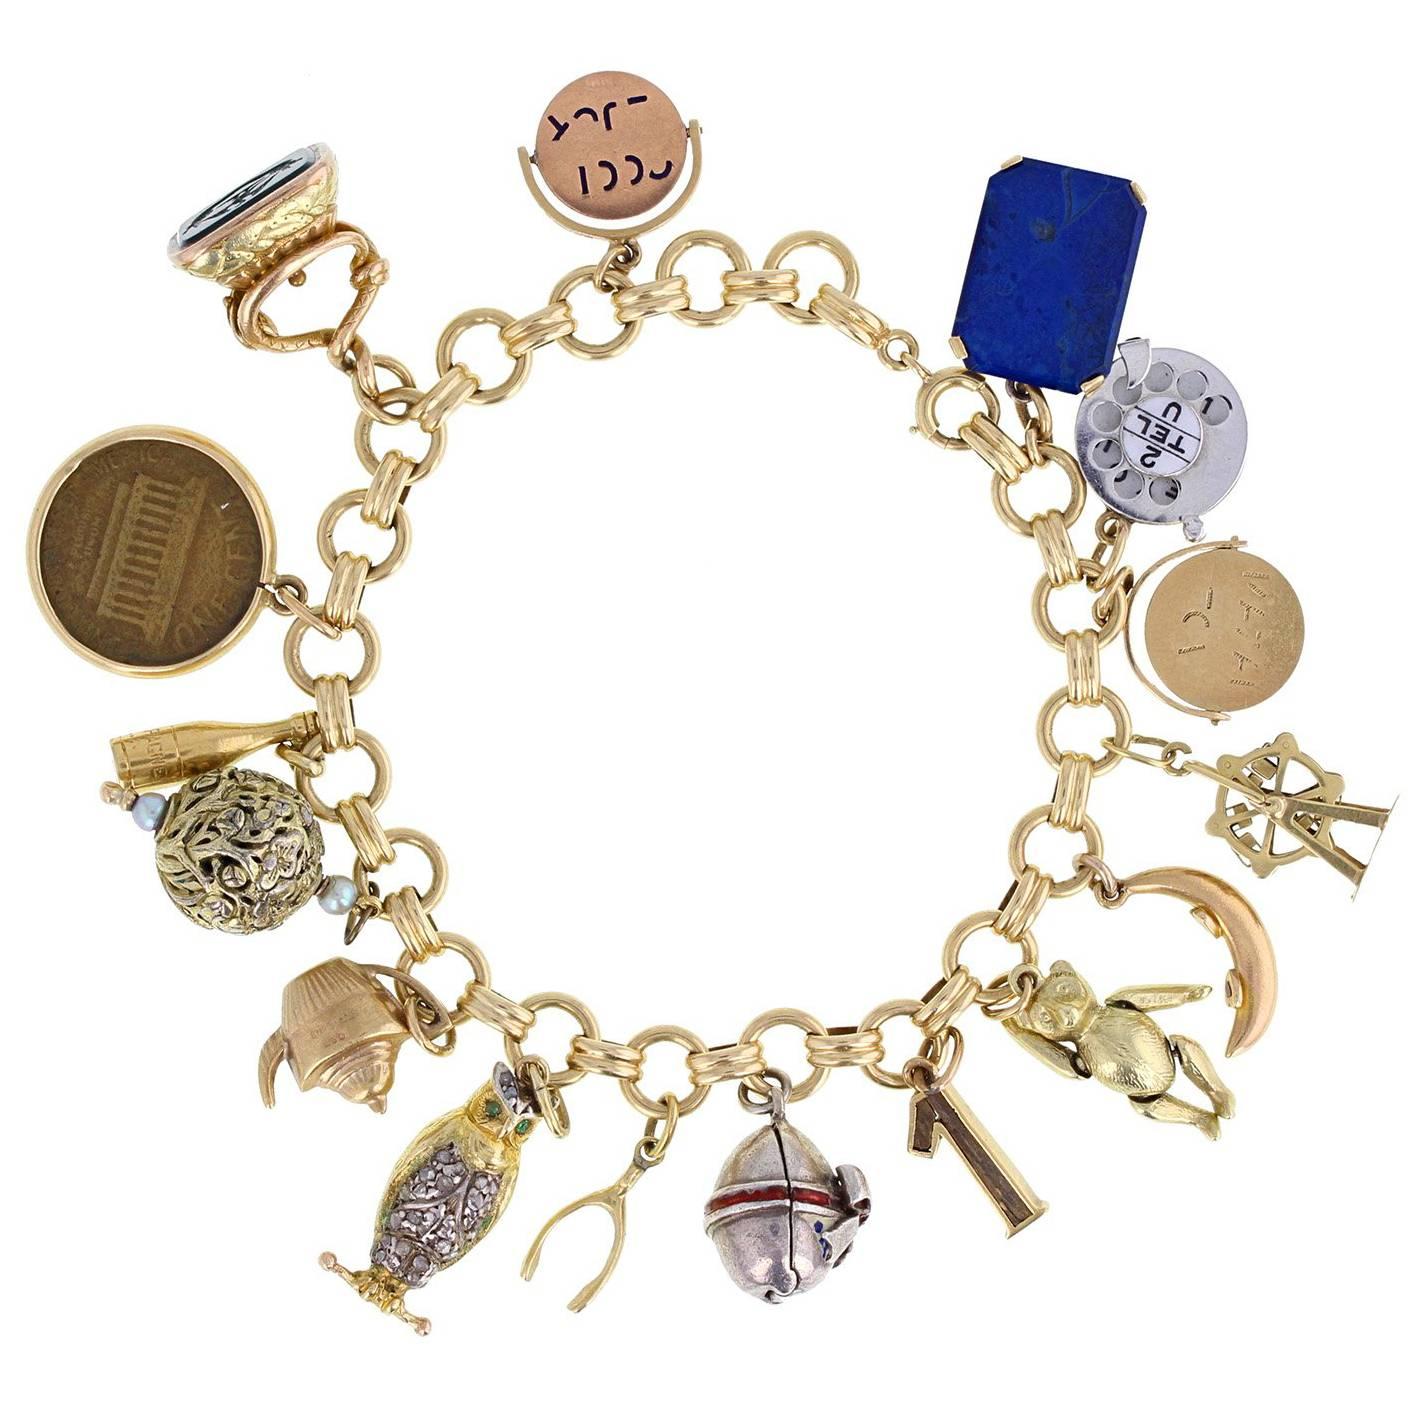 Vintage Gold Charm Bracelet with 16 Various Charms